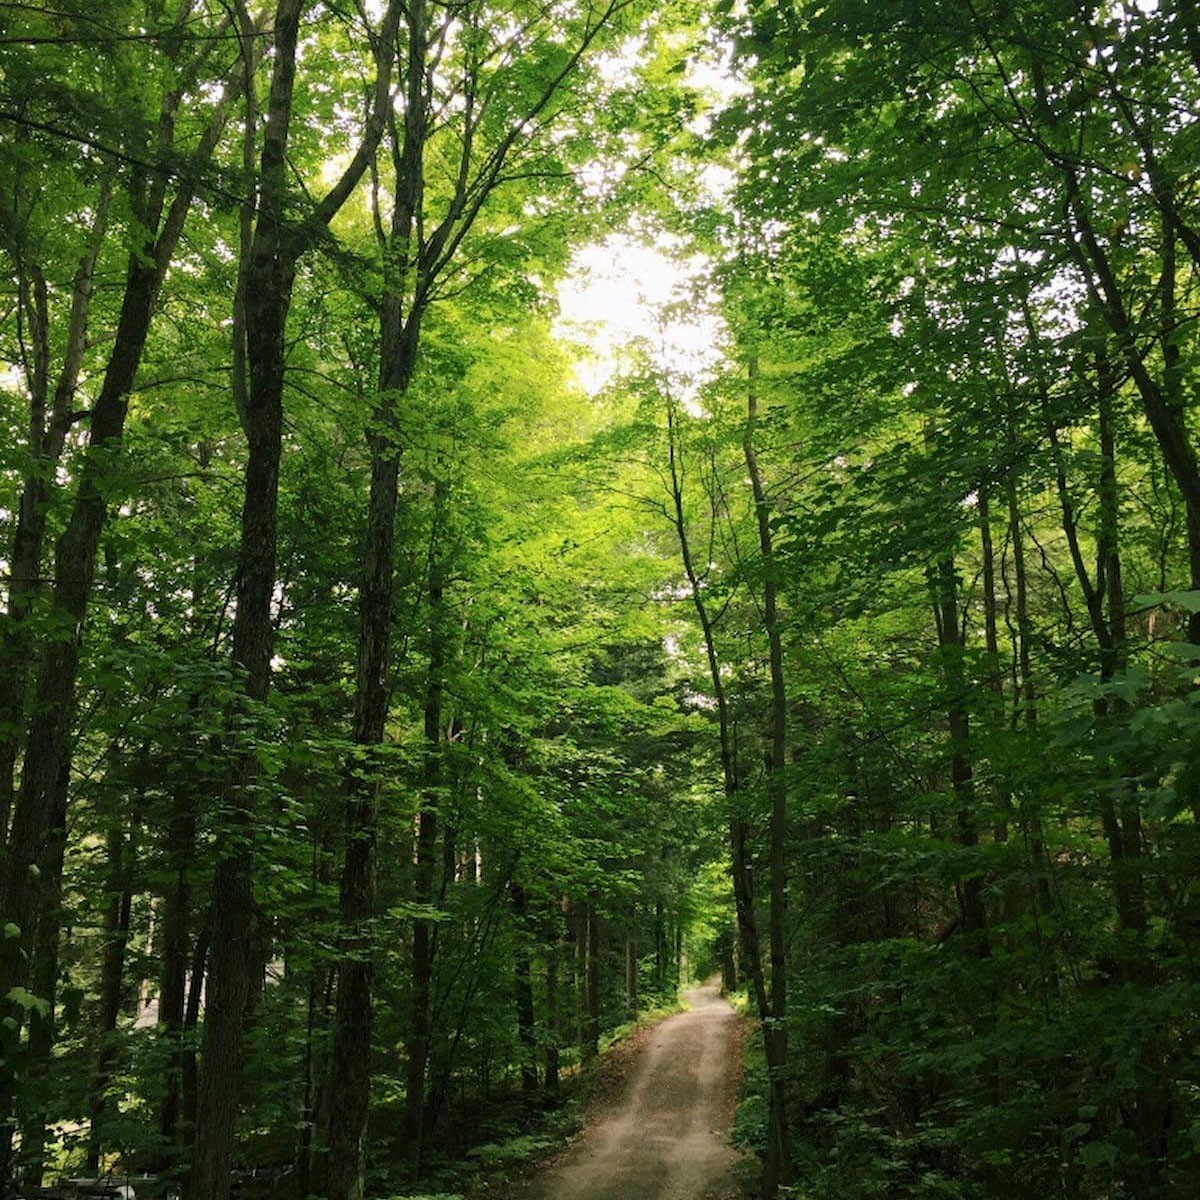 Claire Wortsman '20 captures a beautiful sunny day during a walk in Muskoka, Ontario.